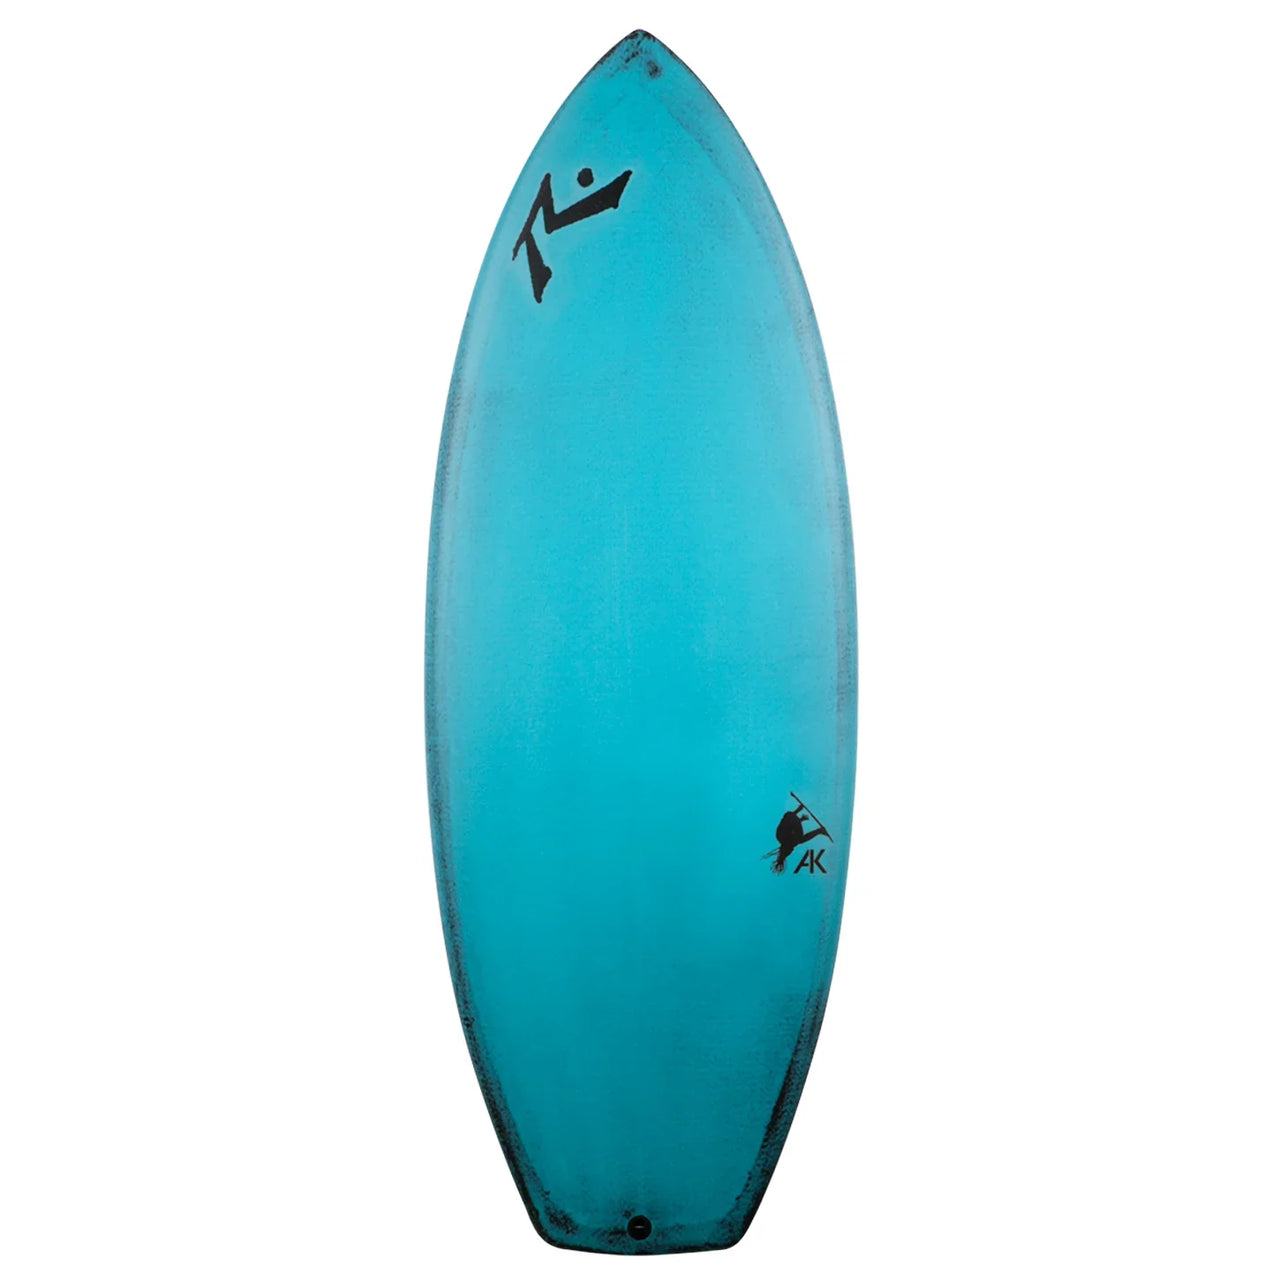 Rusty The Pint Dark Arts Wakesurf Board | Some Sizes/Colors Made to Order